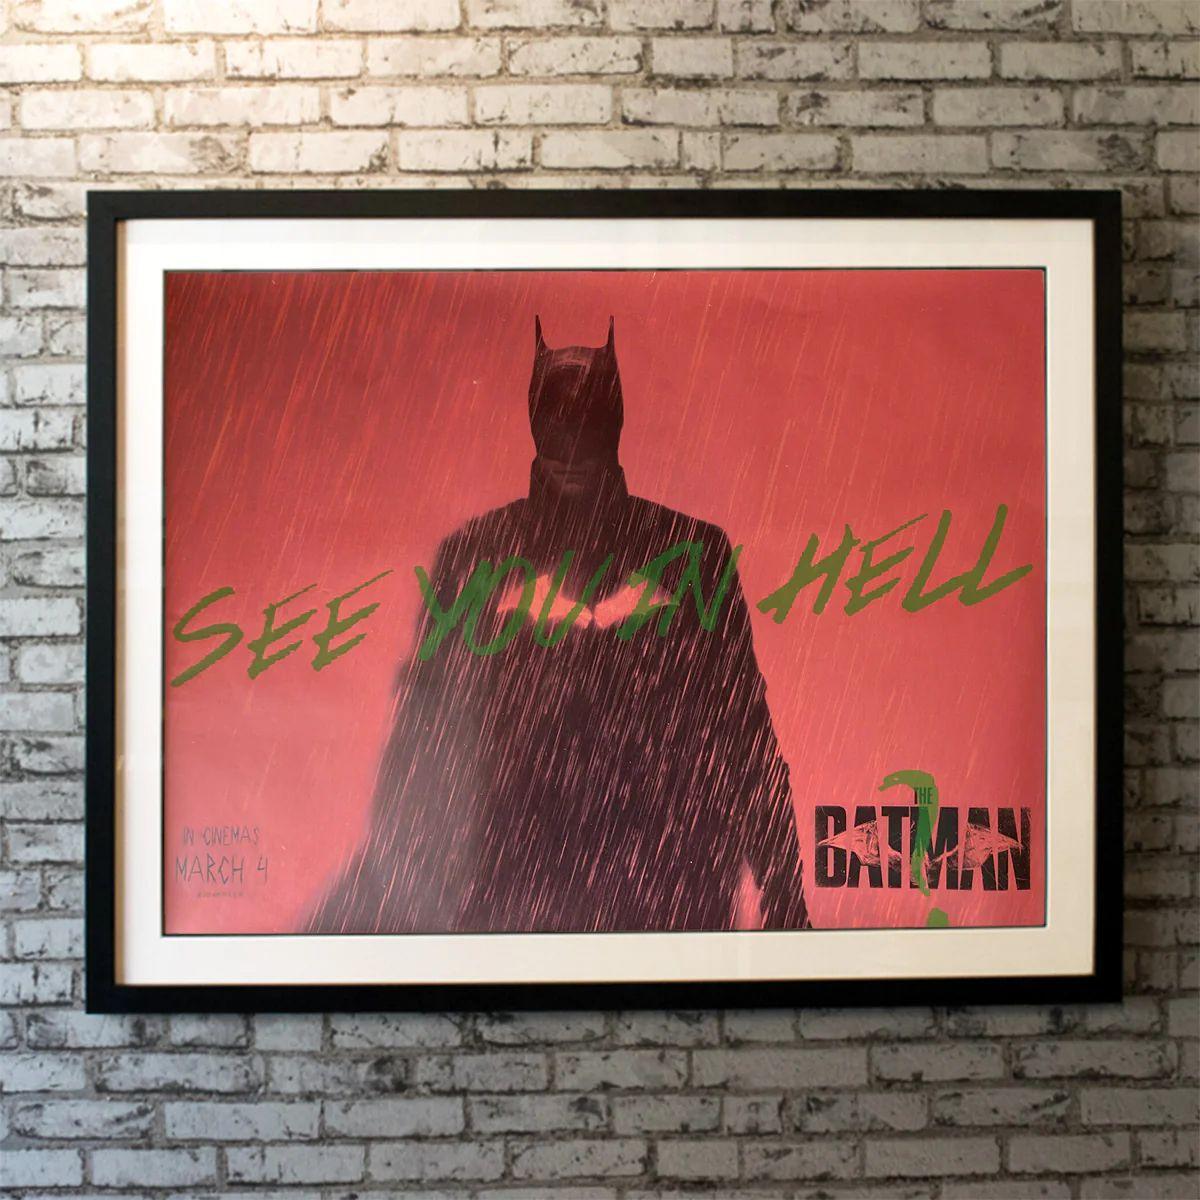 The Batman, Unframed Poster, 2022 *Rare*

Original British Quad (30 X 40 Inches). When a sadistic serial killer begins murdering key political figures in Gotham, Batman is forced to investigate the city's hidden corruption and question his family's